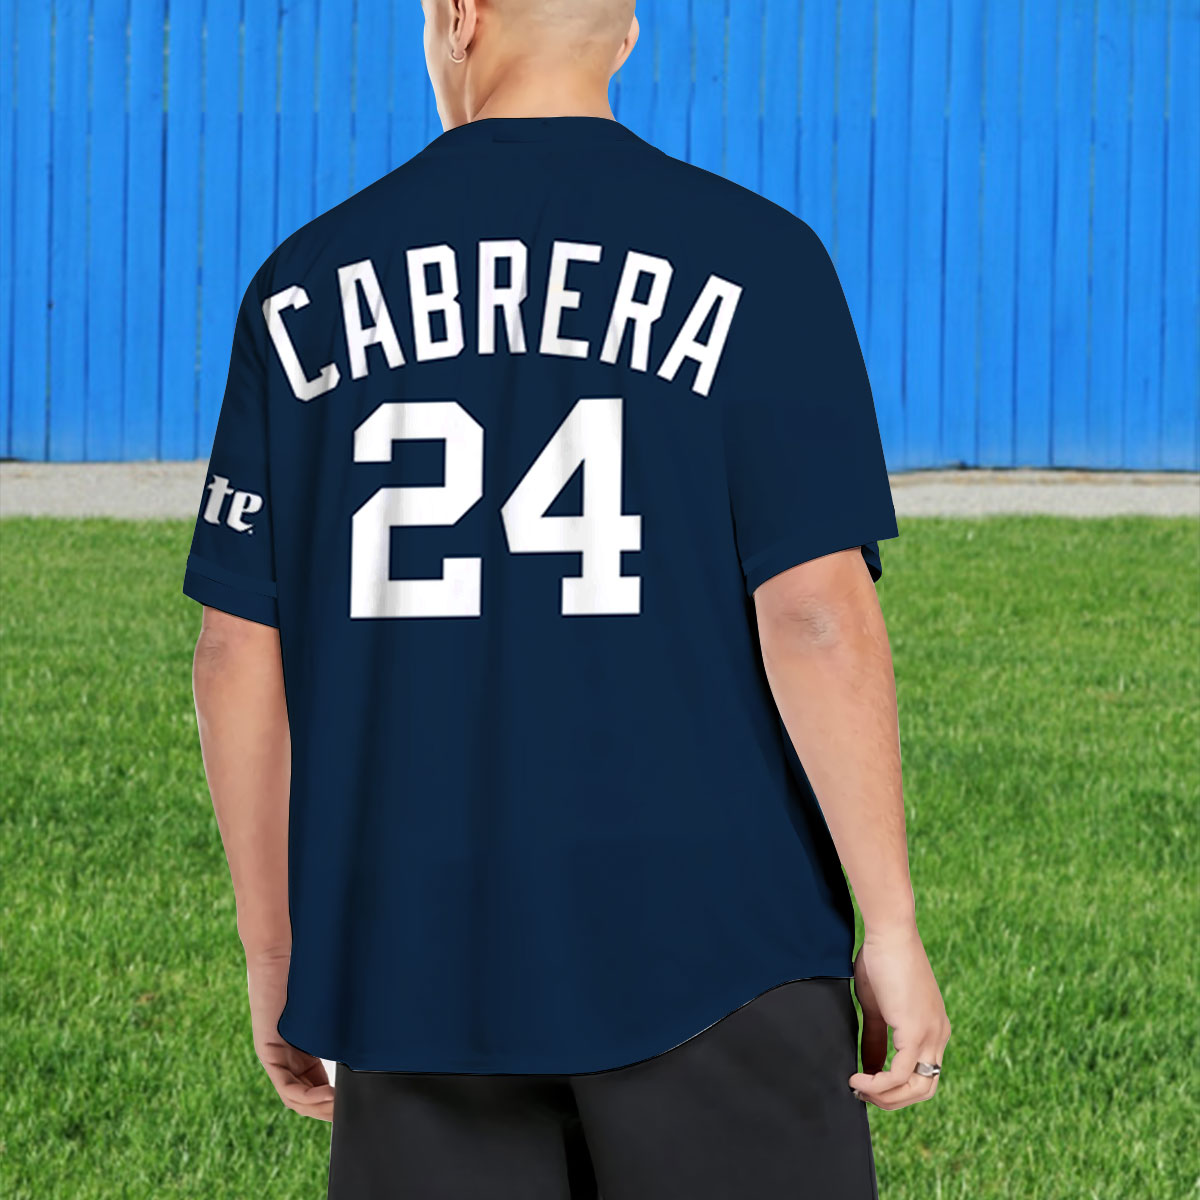 Detroit Tigers on X: Welcome to history, @MiguelCabrera. https